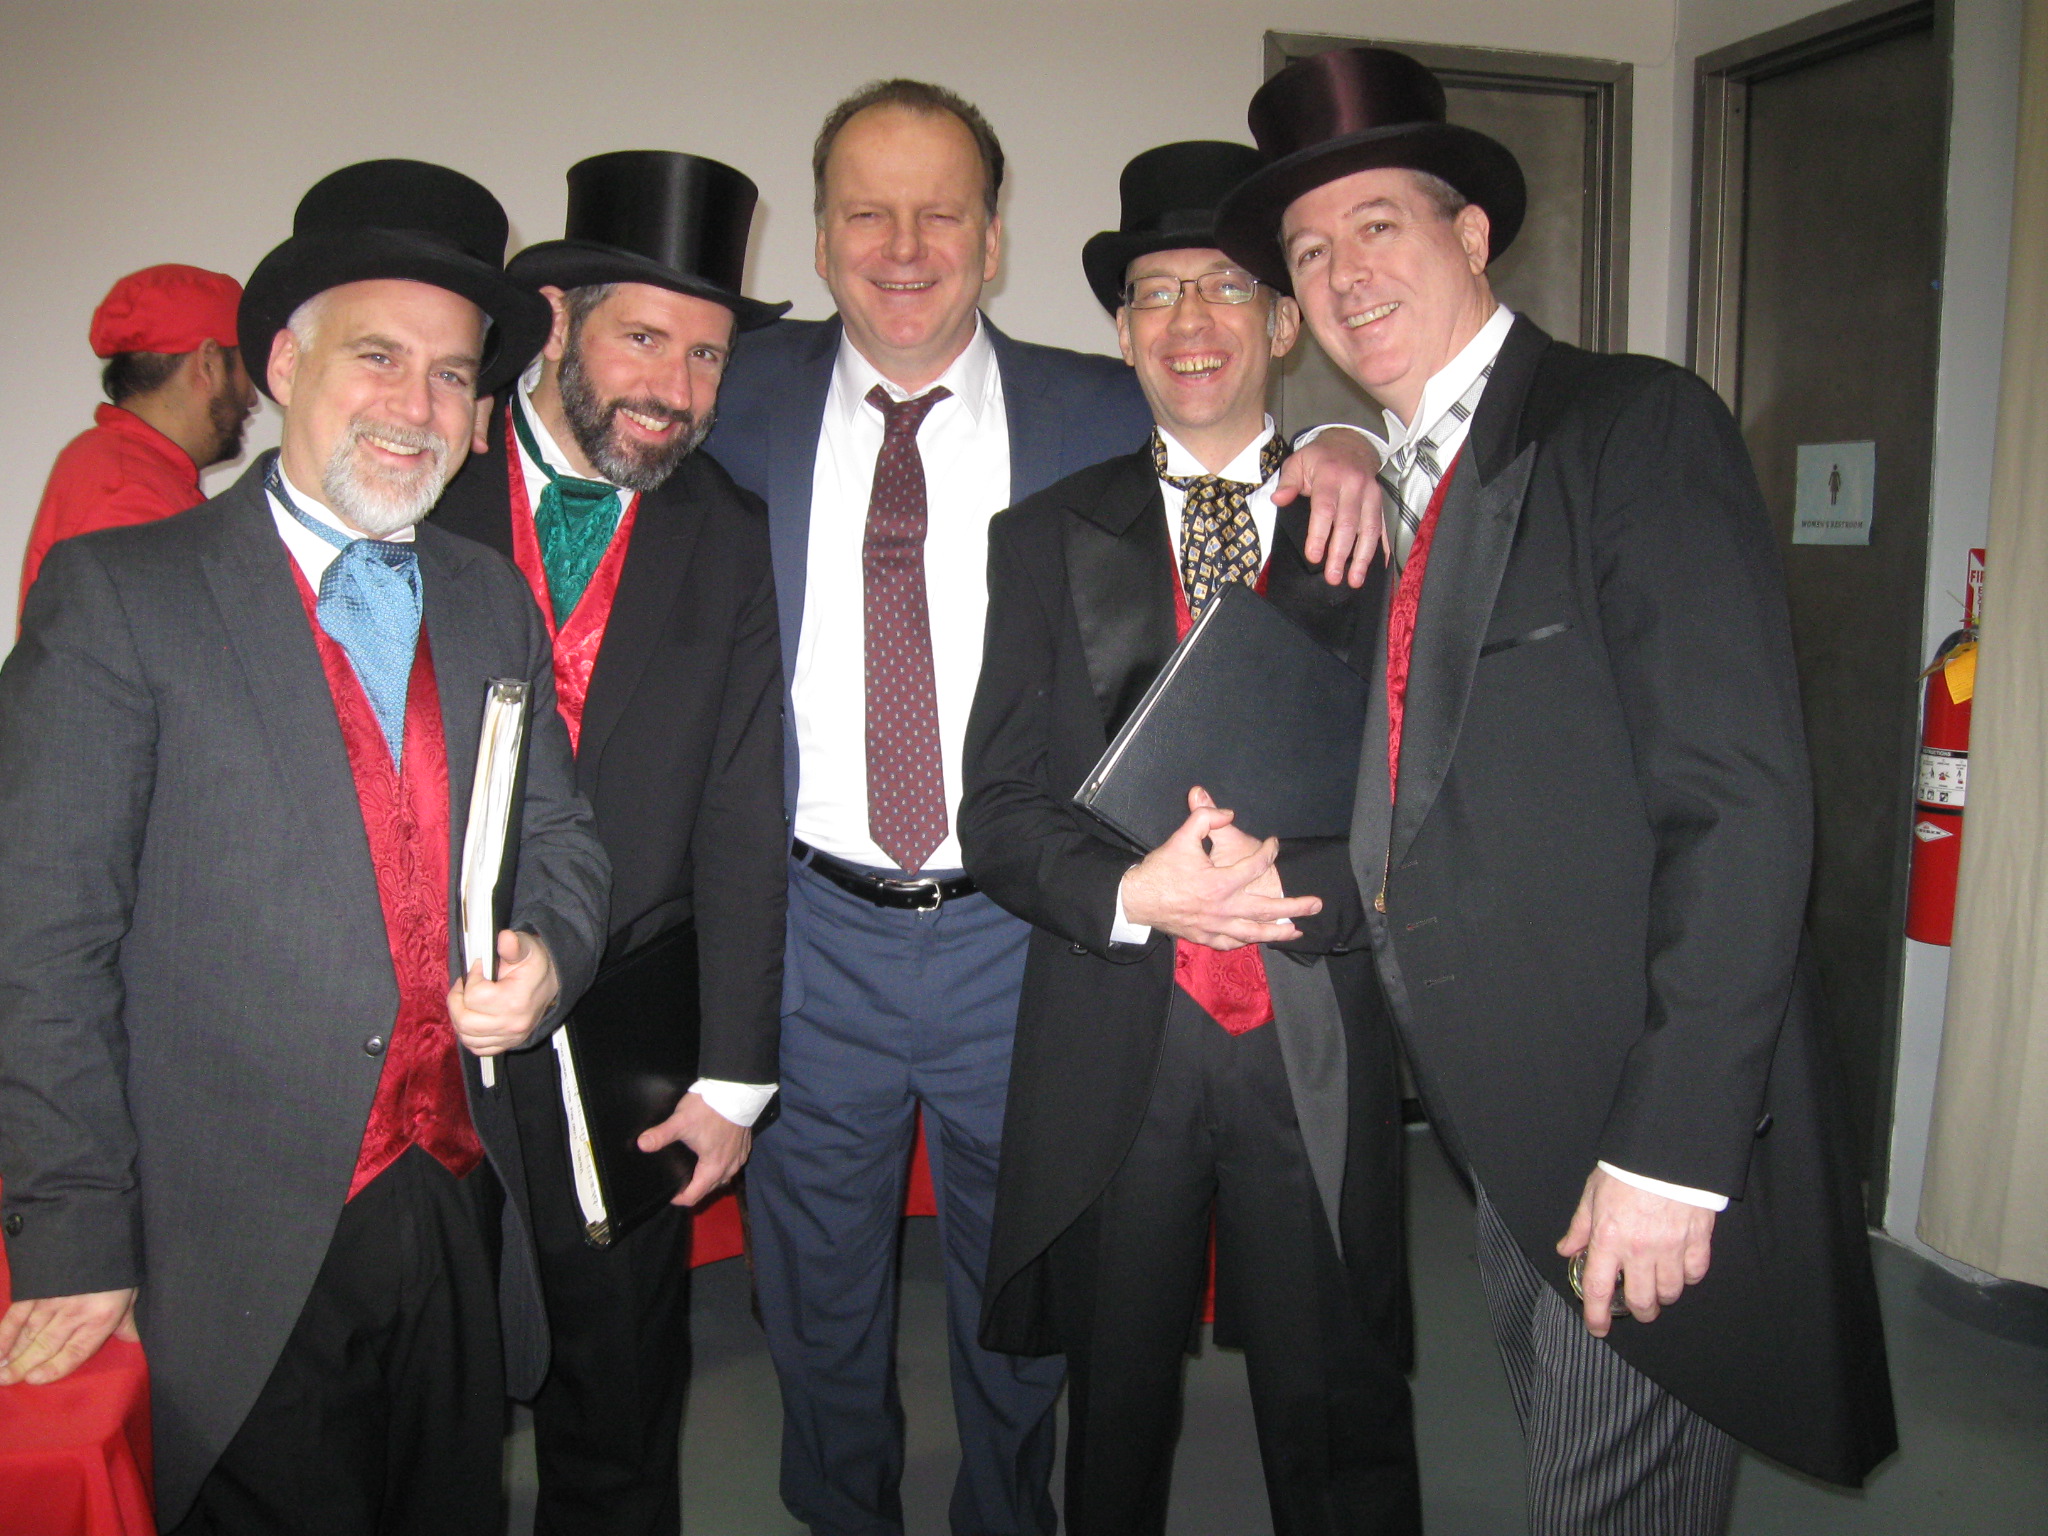 Carson Church and the Carolers with Robert Clohessy at Blue Bloods Christmas Party.